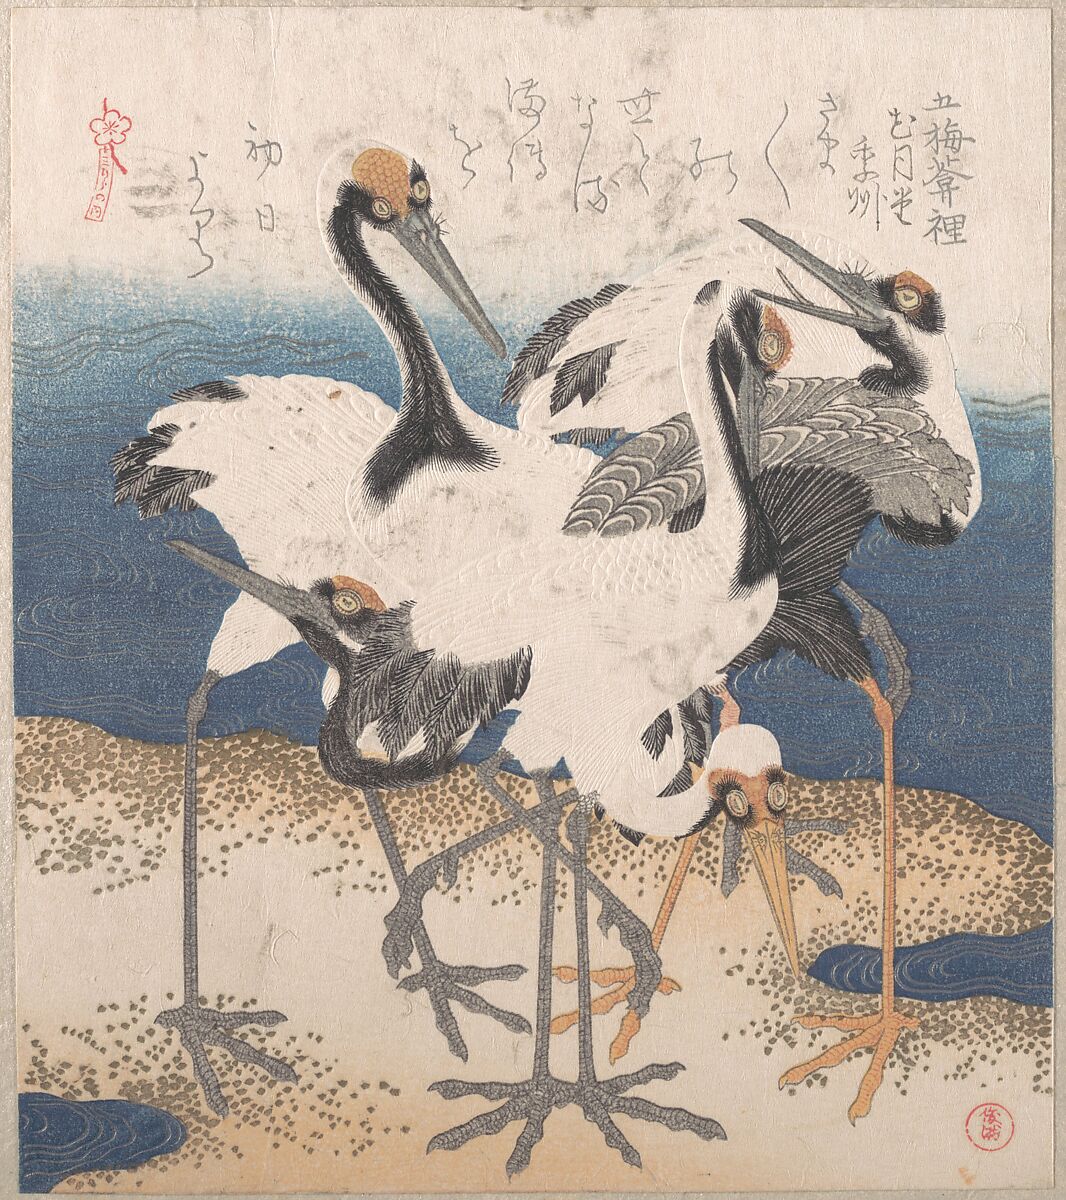 Five Cranes by the Water’s Edge, from the series Three Sheets (Mihira no uchi), Totoya Hokkei (Japanese, 1780–1850), Part of an album of woodblock prints (surimono); ink and color on paper, Japan 